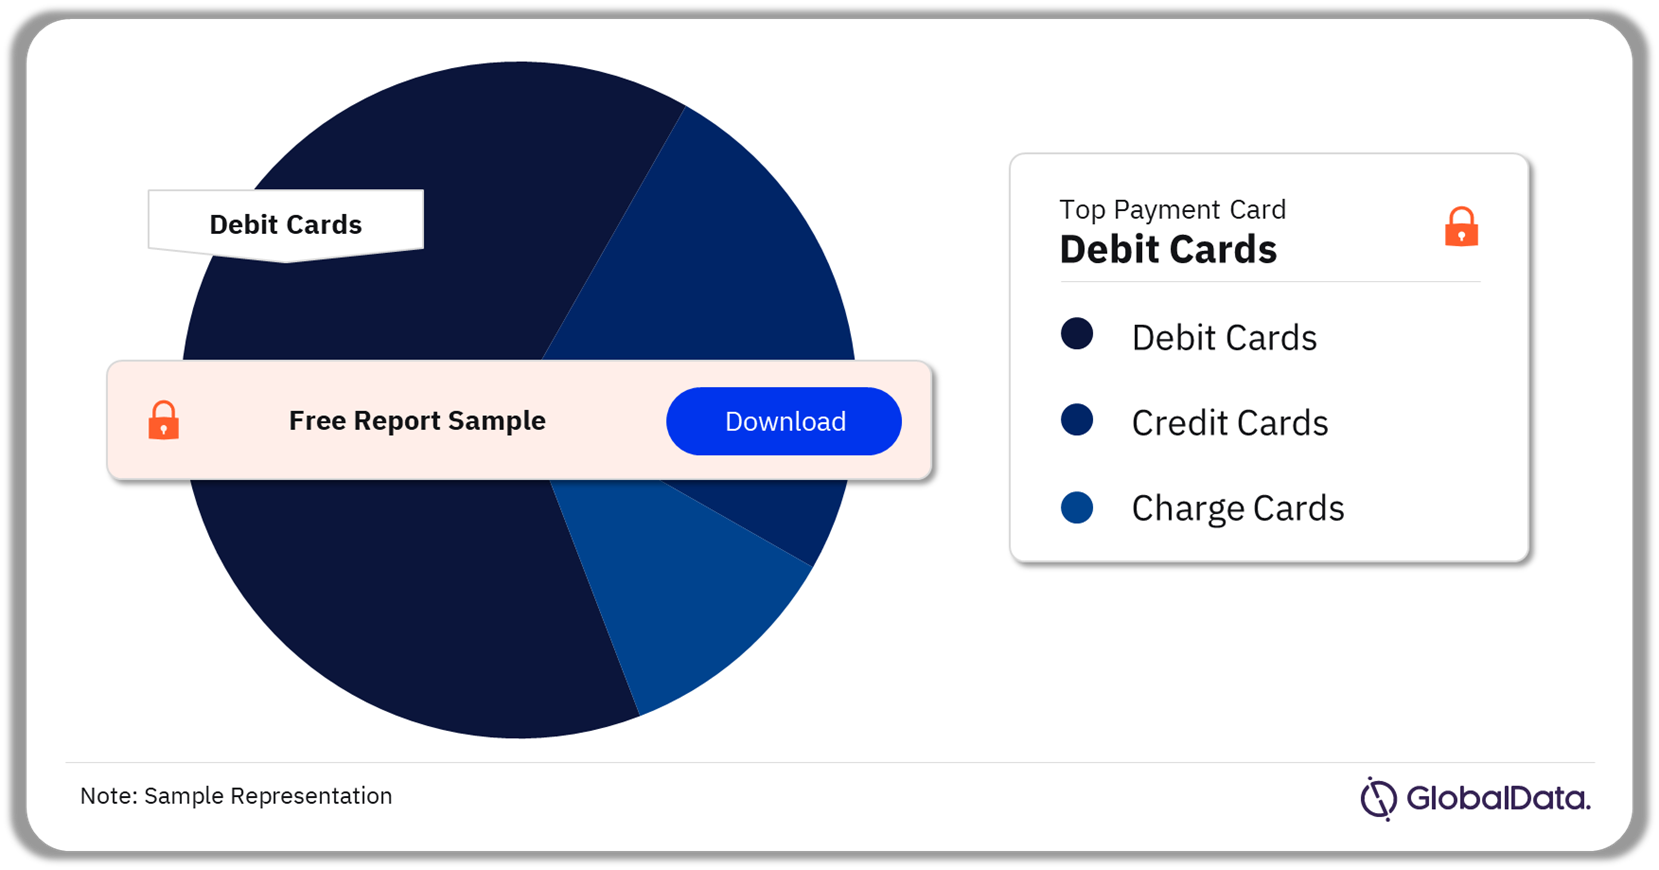 Norway Cards-Based Payments Market Analysis, 2023 (%)